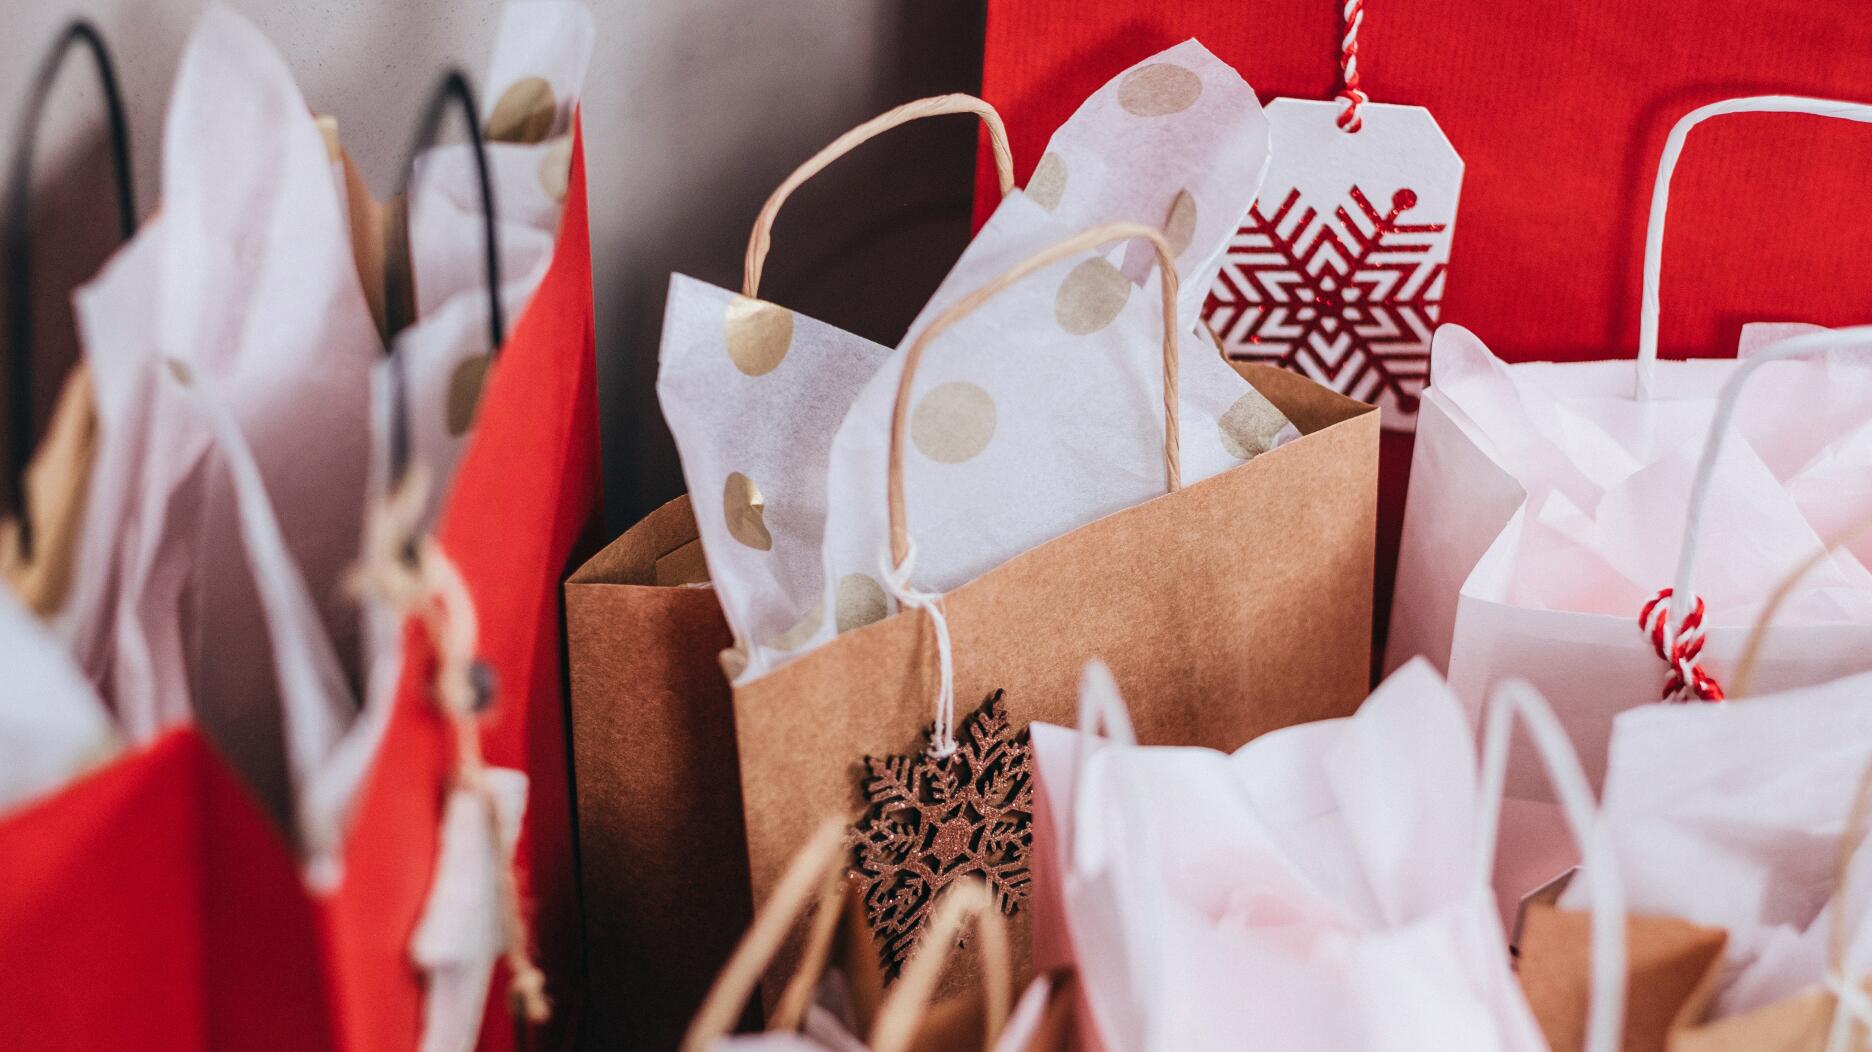 Stock image of holiday gifts in bags